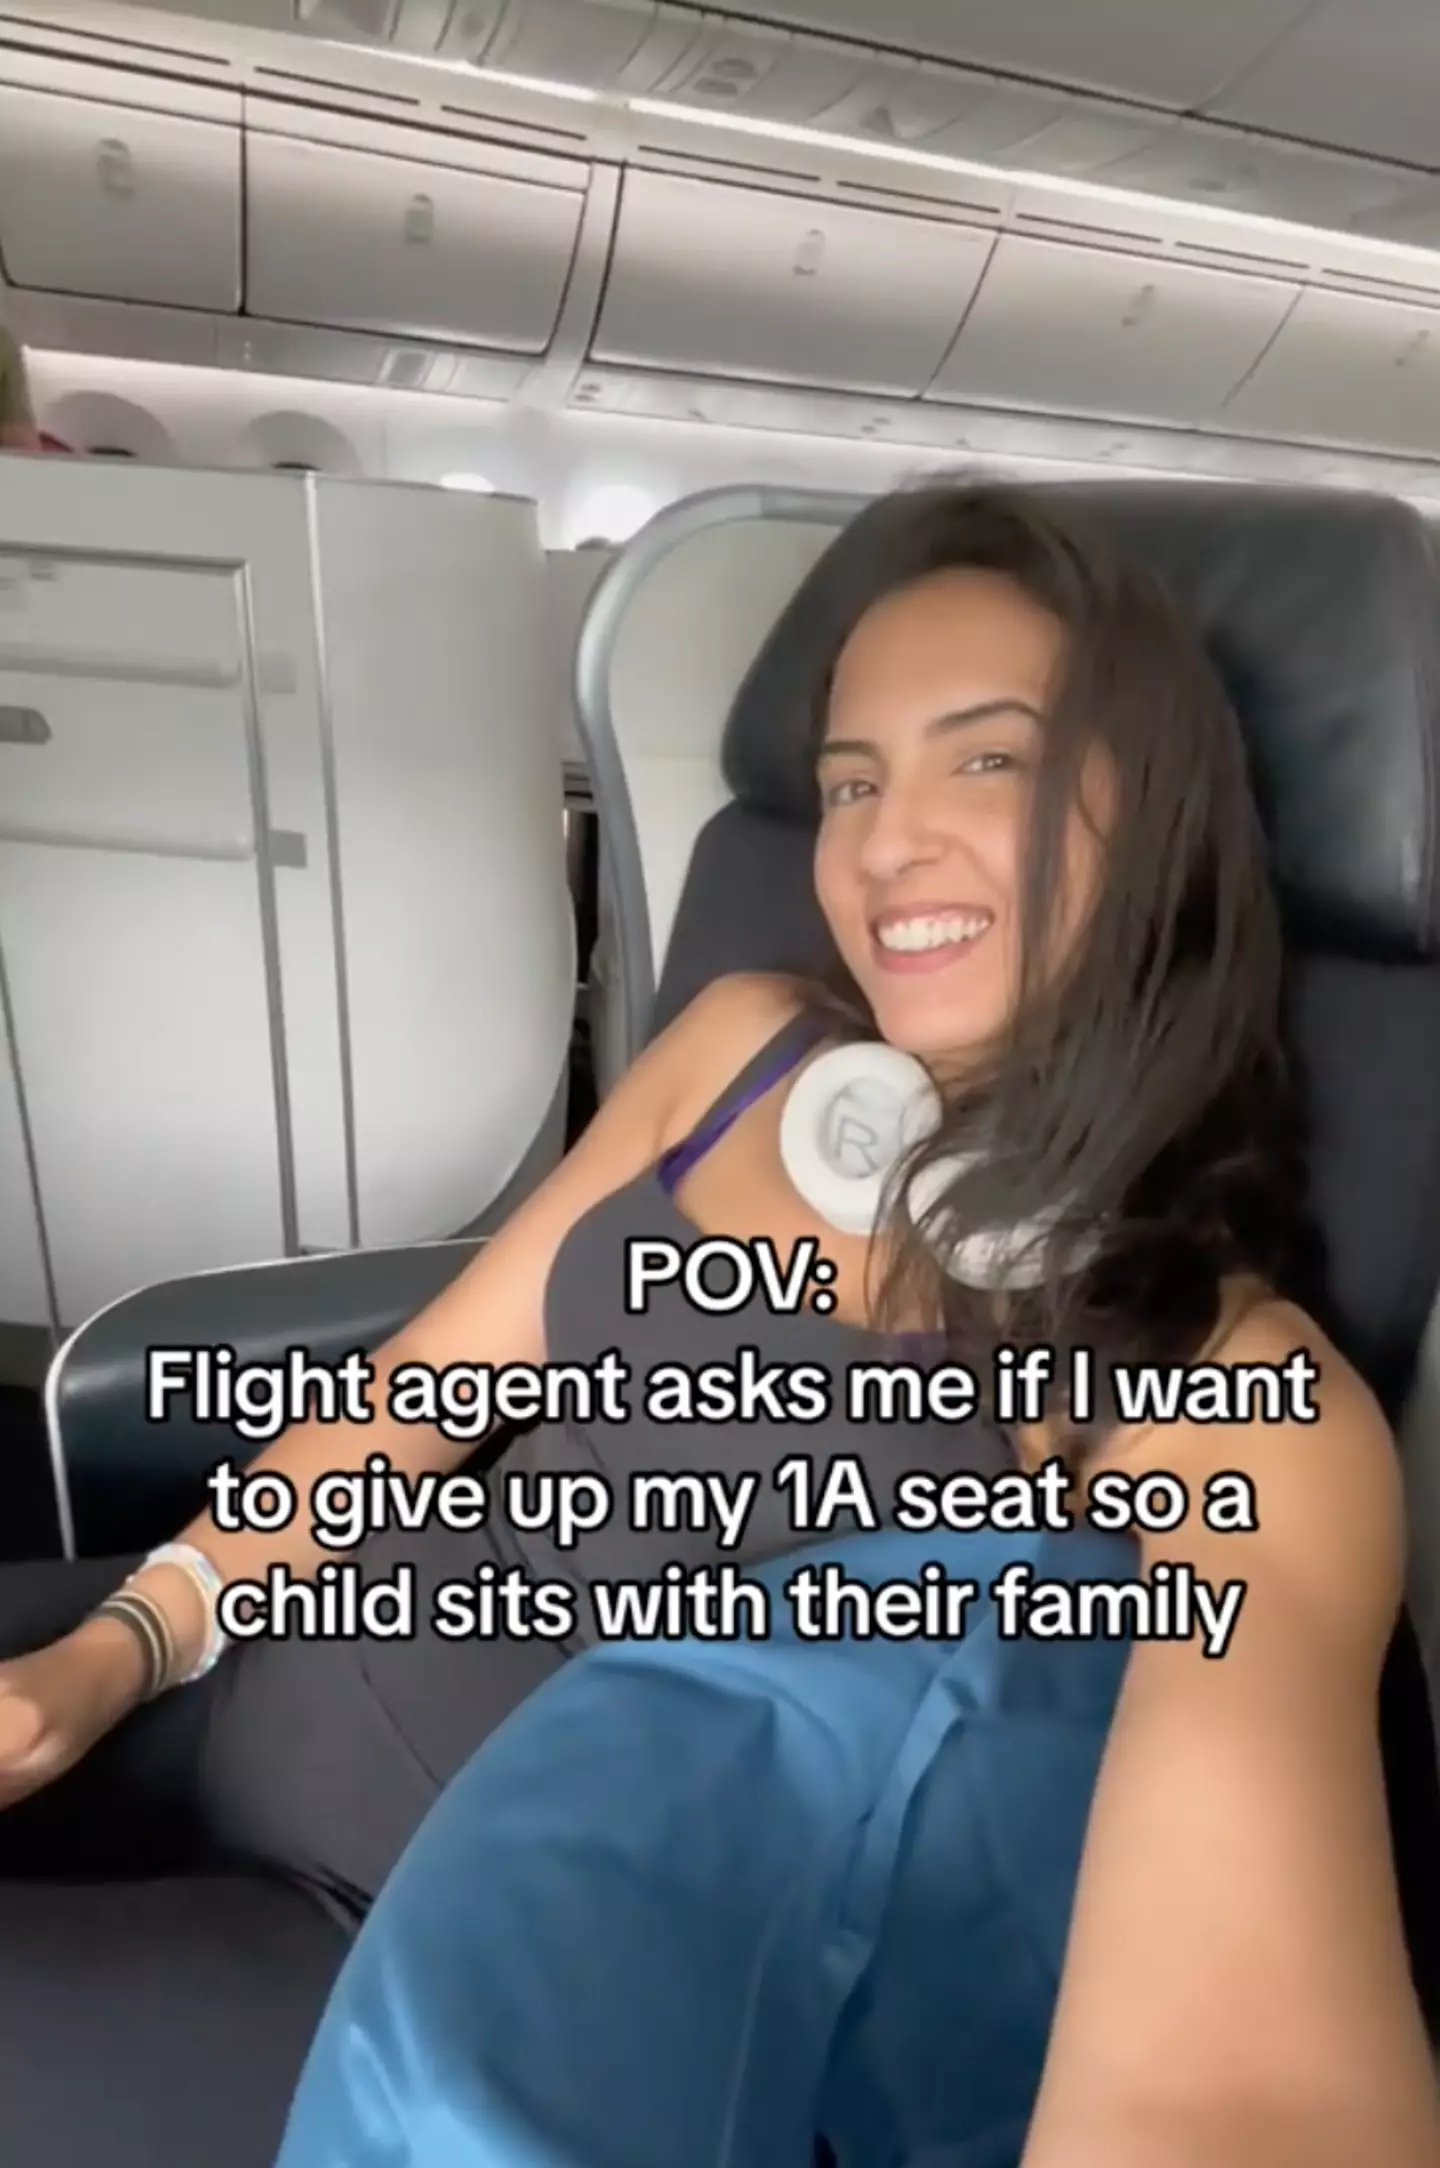 The woman refused the family's request to swap seats.